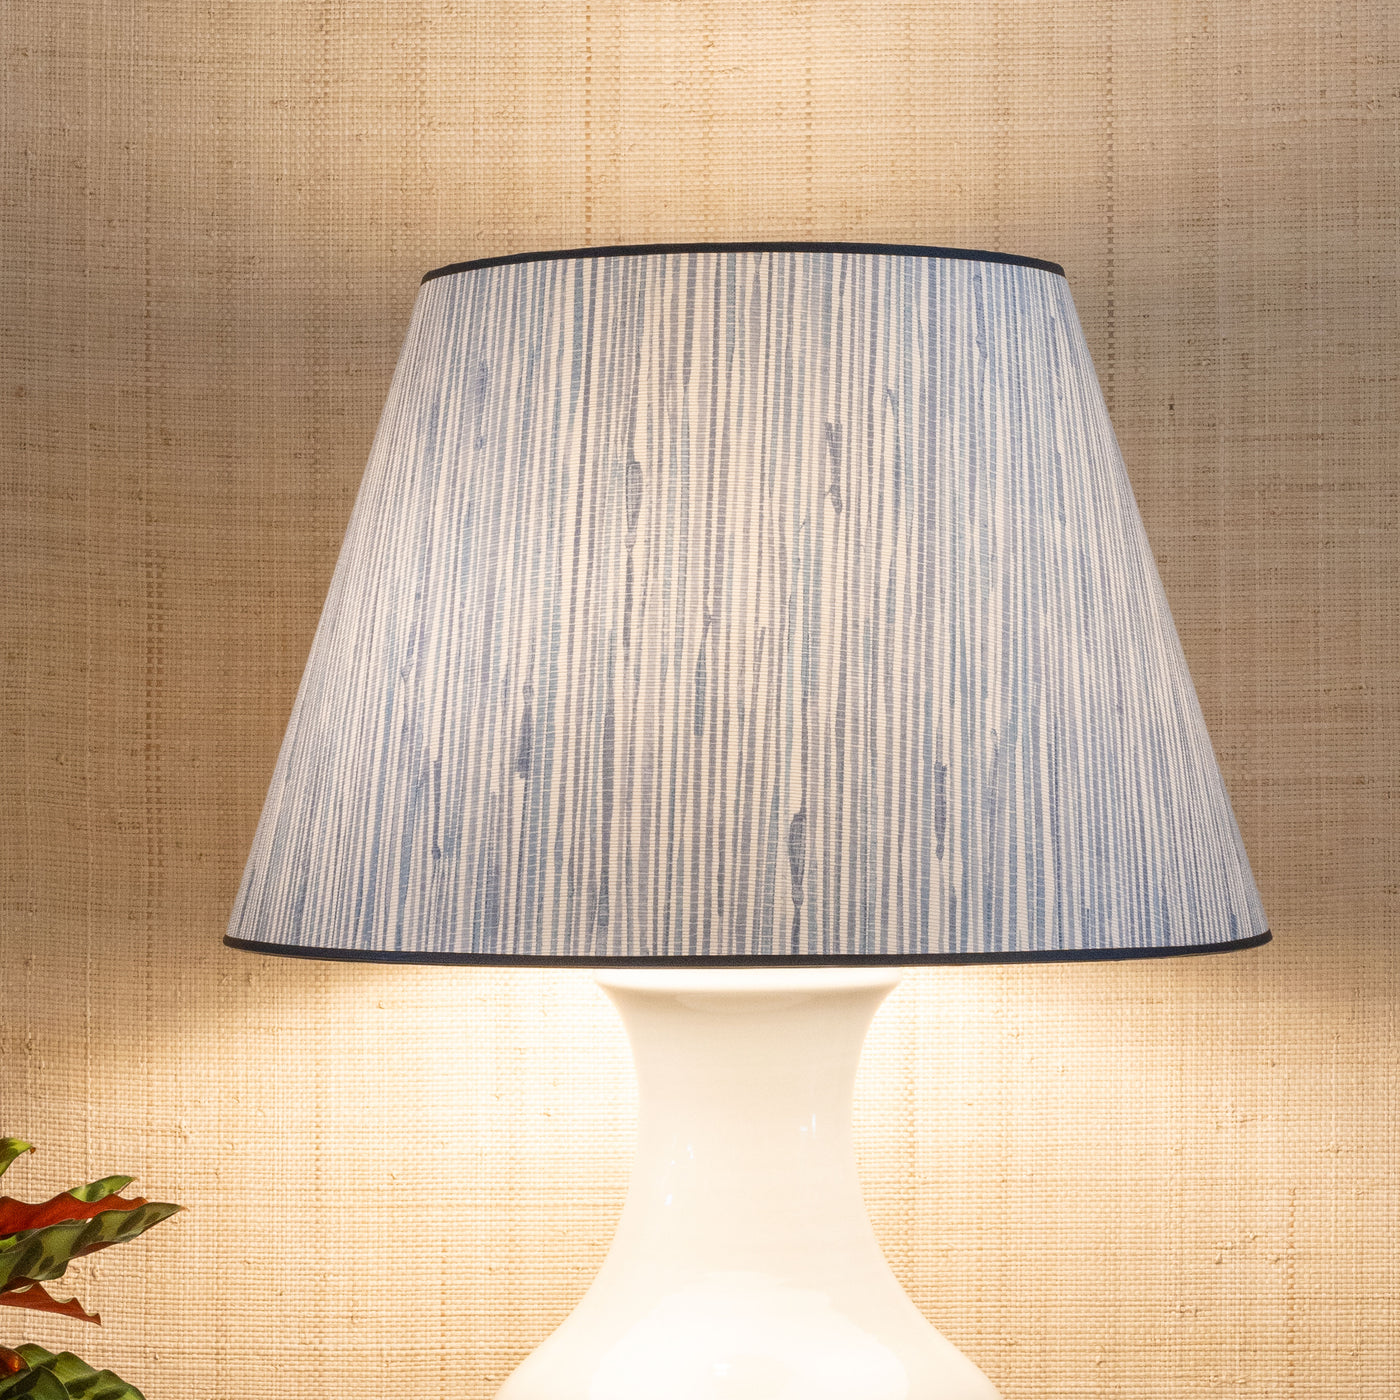 New Grasscloth Lampshade in Blue | Newport Lamp And Shade | Located in Newport, RI